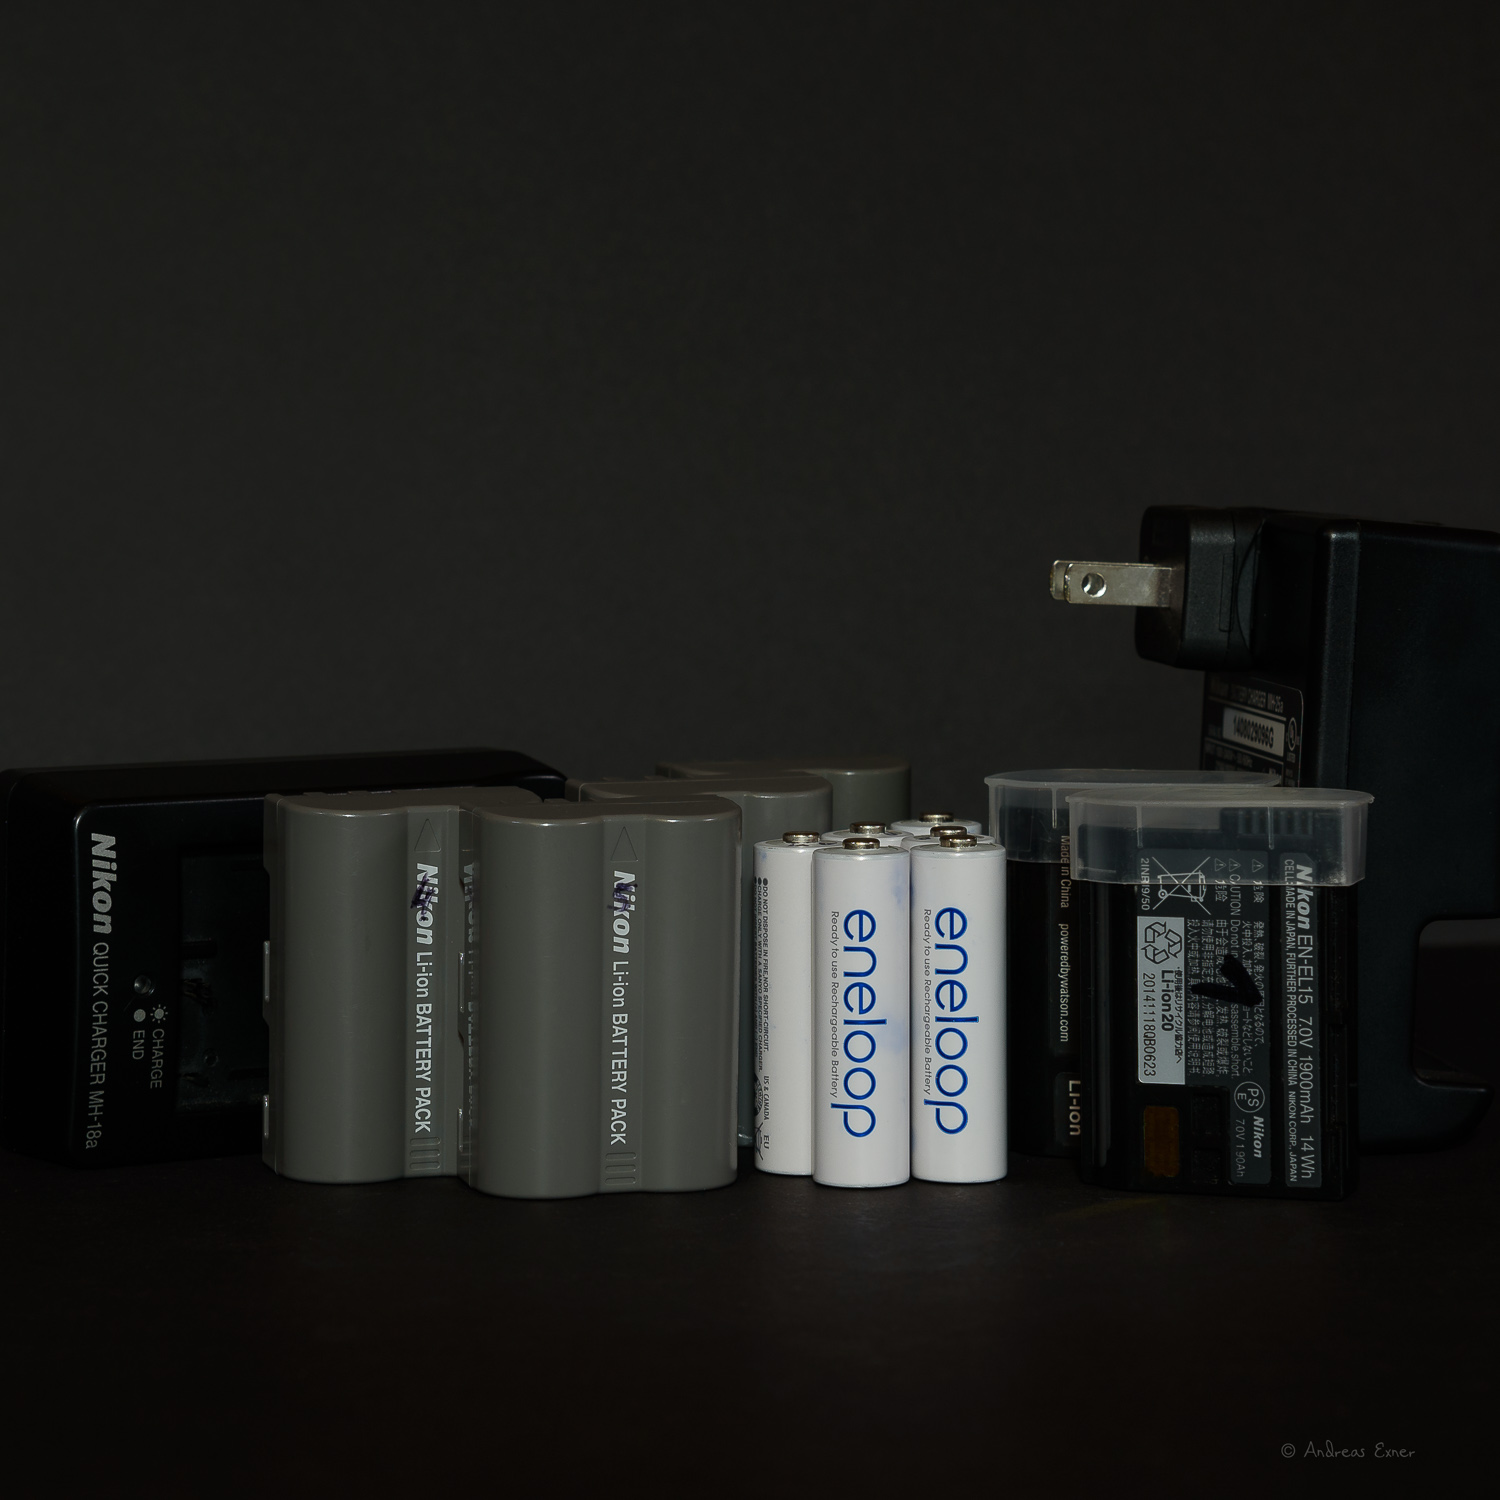  Camera batteries  During all the years, using first the NIKON D200, later D300s, D750, and now the Z 6II, I have used original NIKON batteries, as well third party products, like Impact, Pearstone, or Watson. To be honest, I have not found any signi